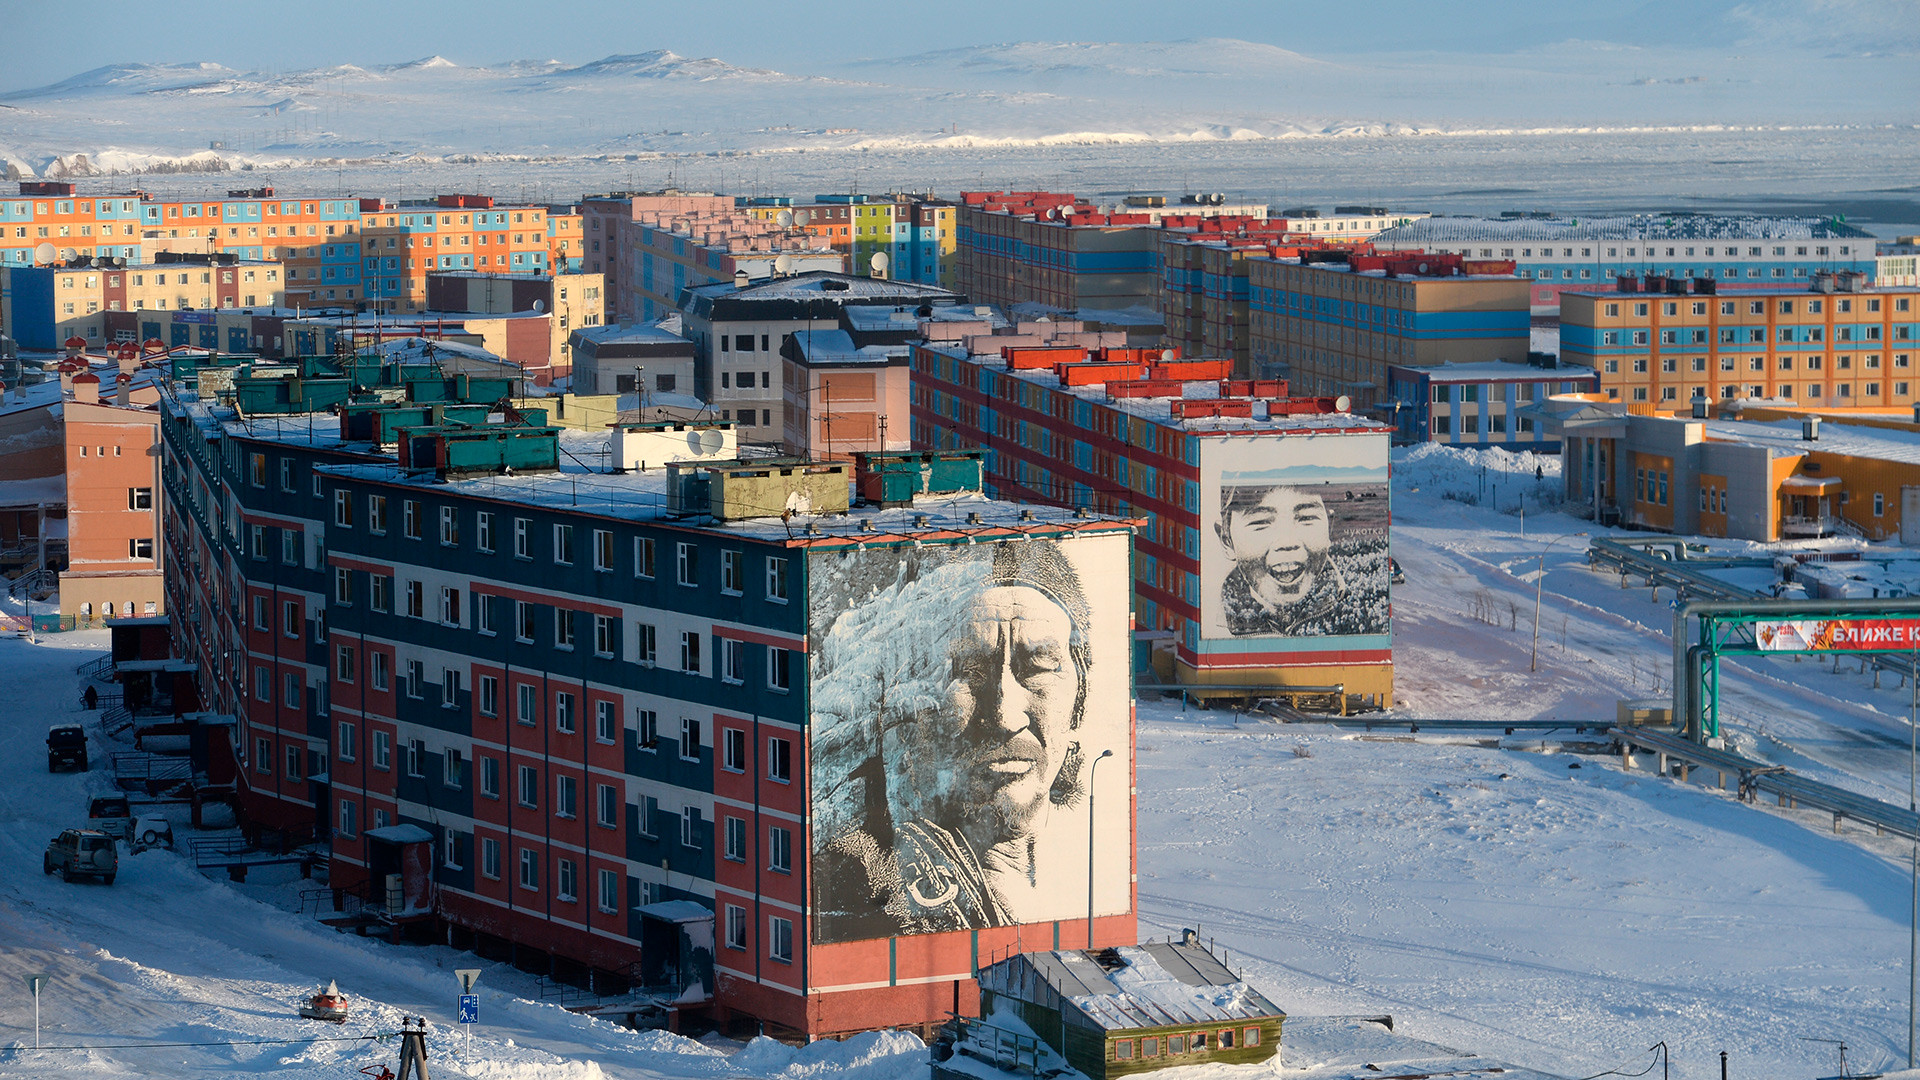 Residential buildings in modern Anadyr, the capital of Chukotka Autonomous Okrug within Russia. 